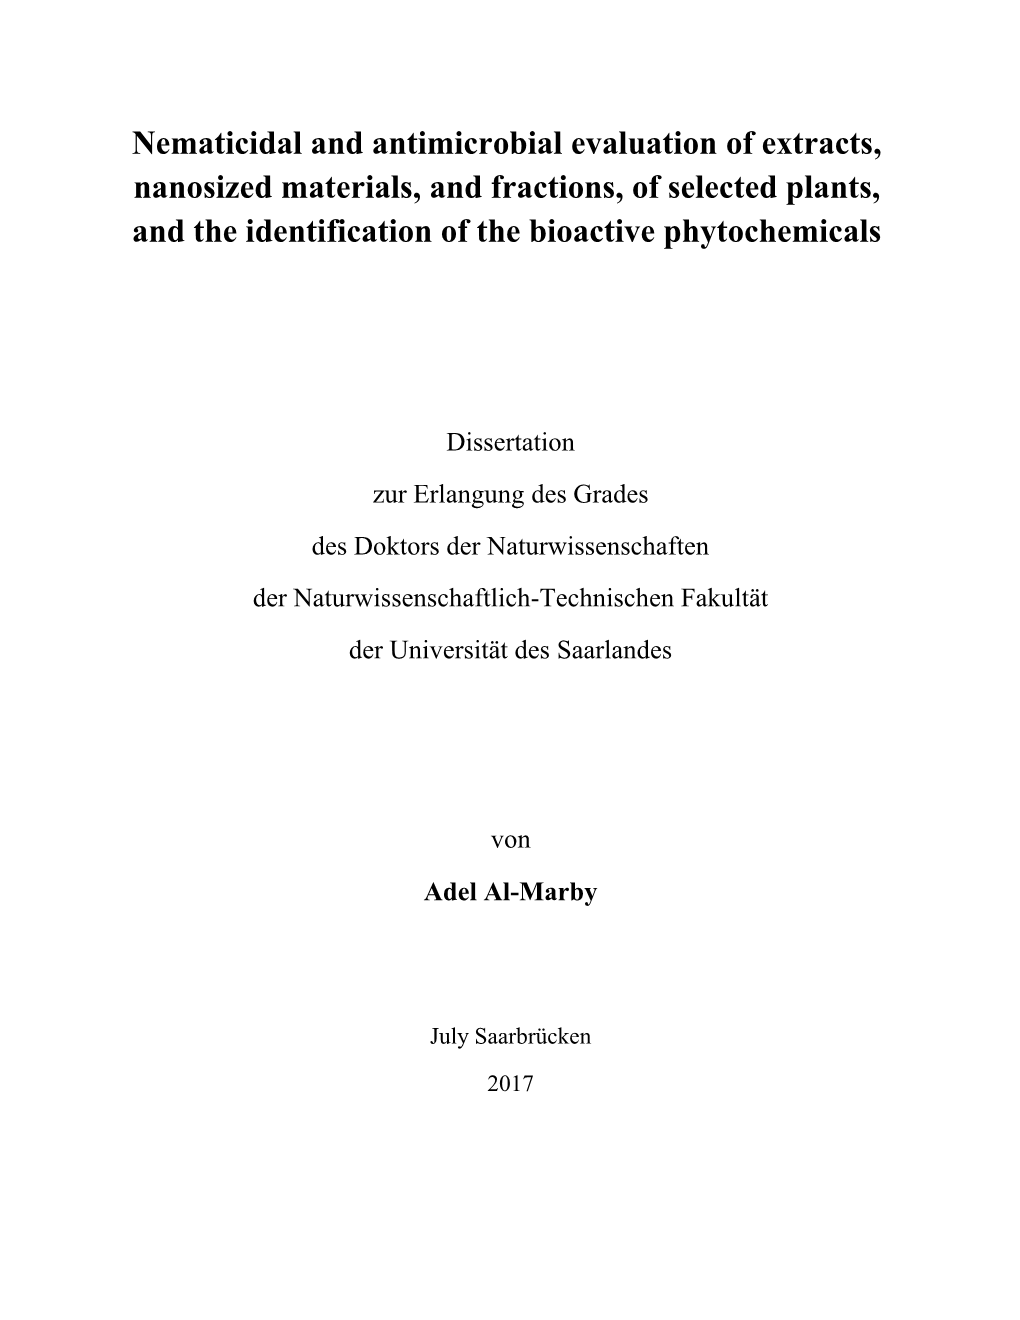 Nematicidal and Antimicrobial Evaluation of Extracts, Nanosized Materials, and Fractions, of Selected Plants, and the Identification of the Bioactive Phytochemicals